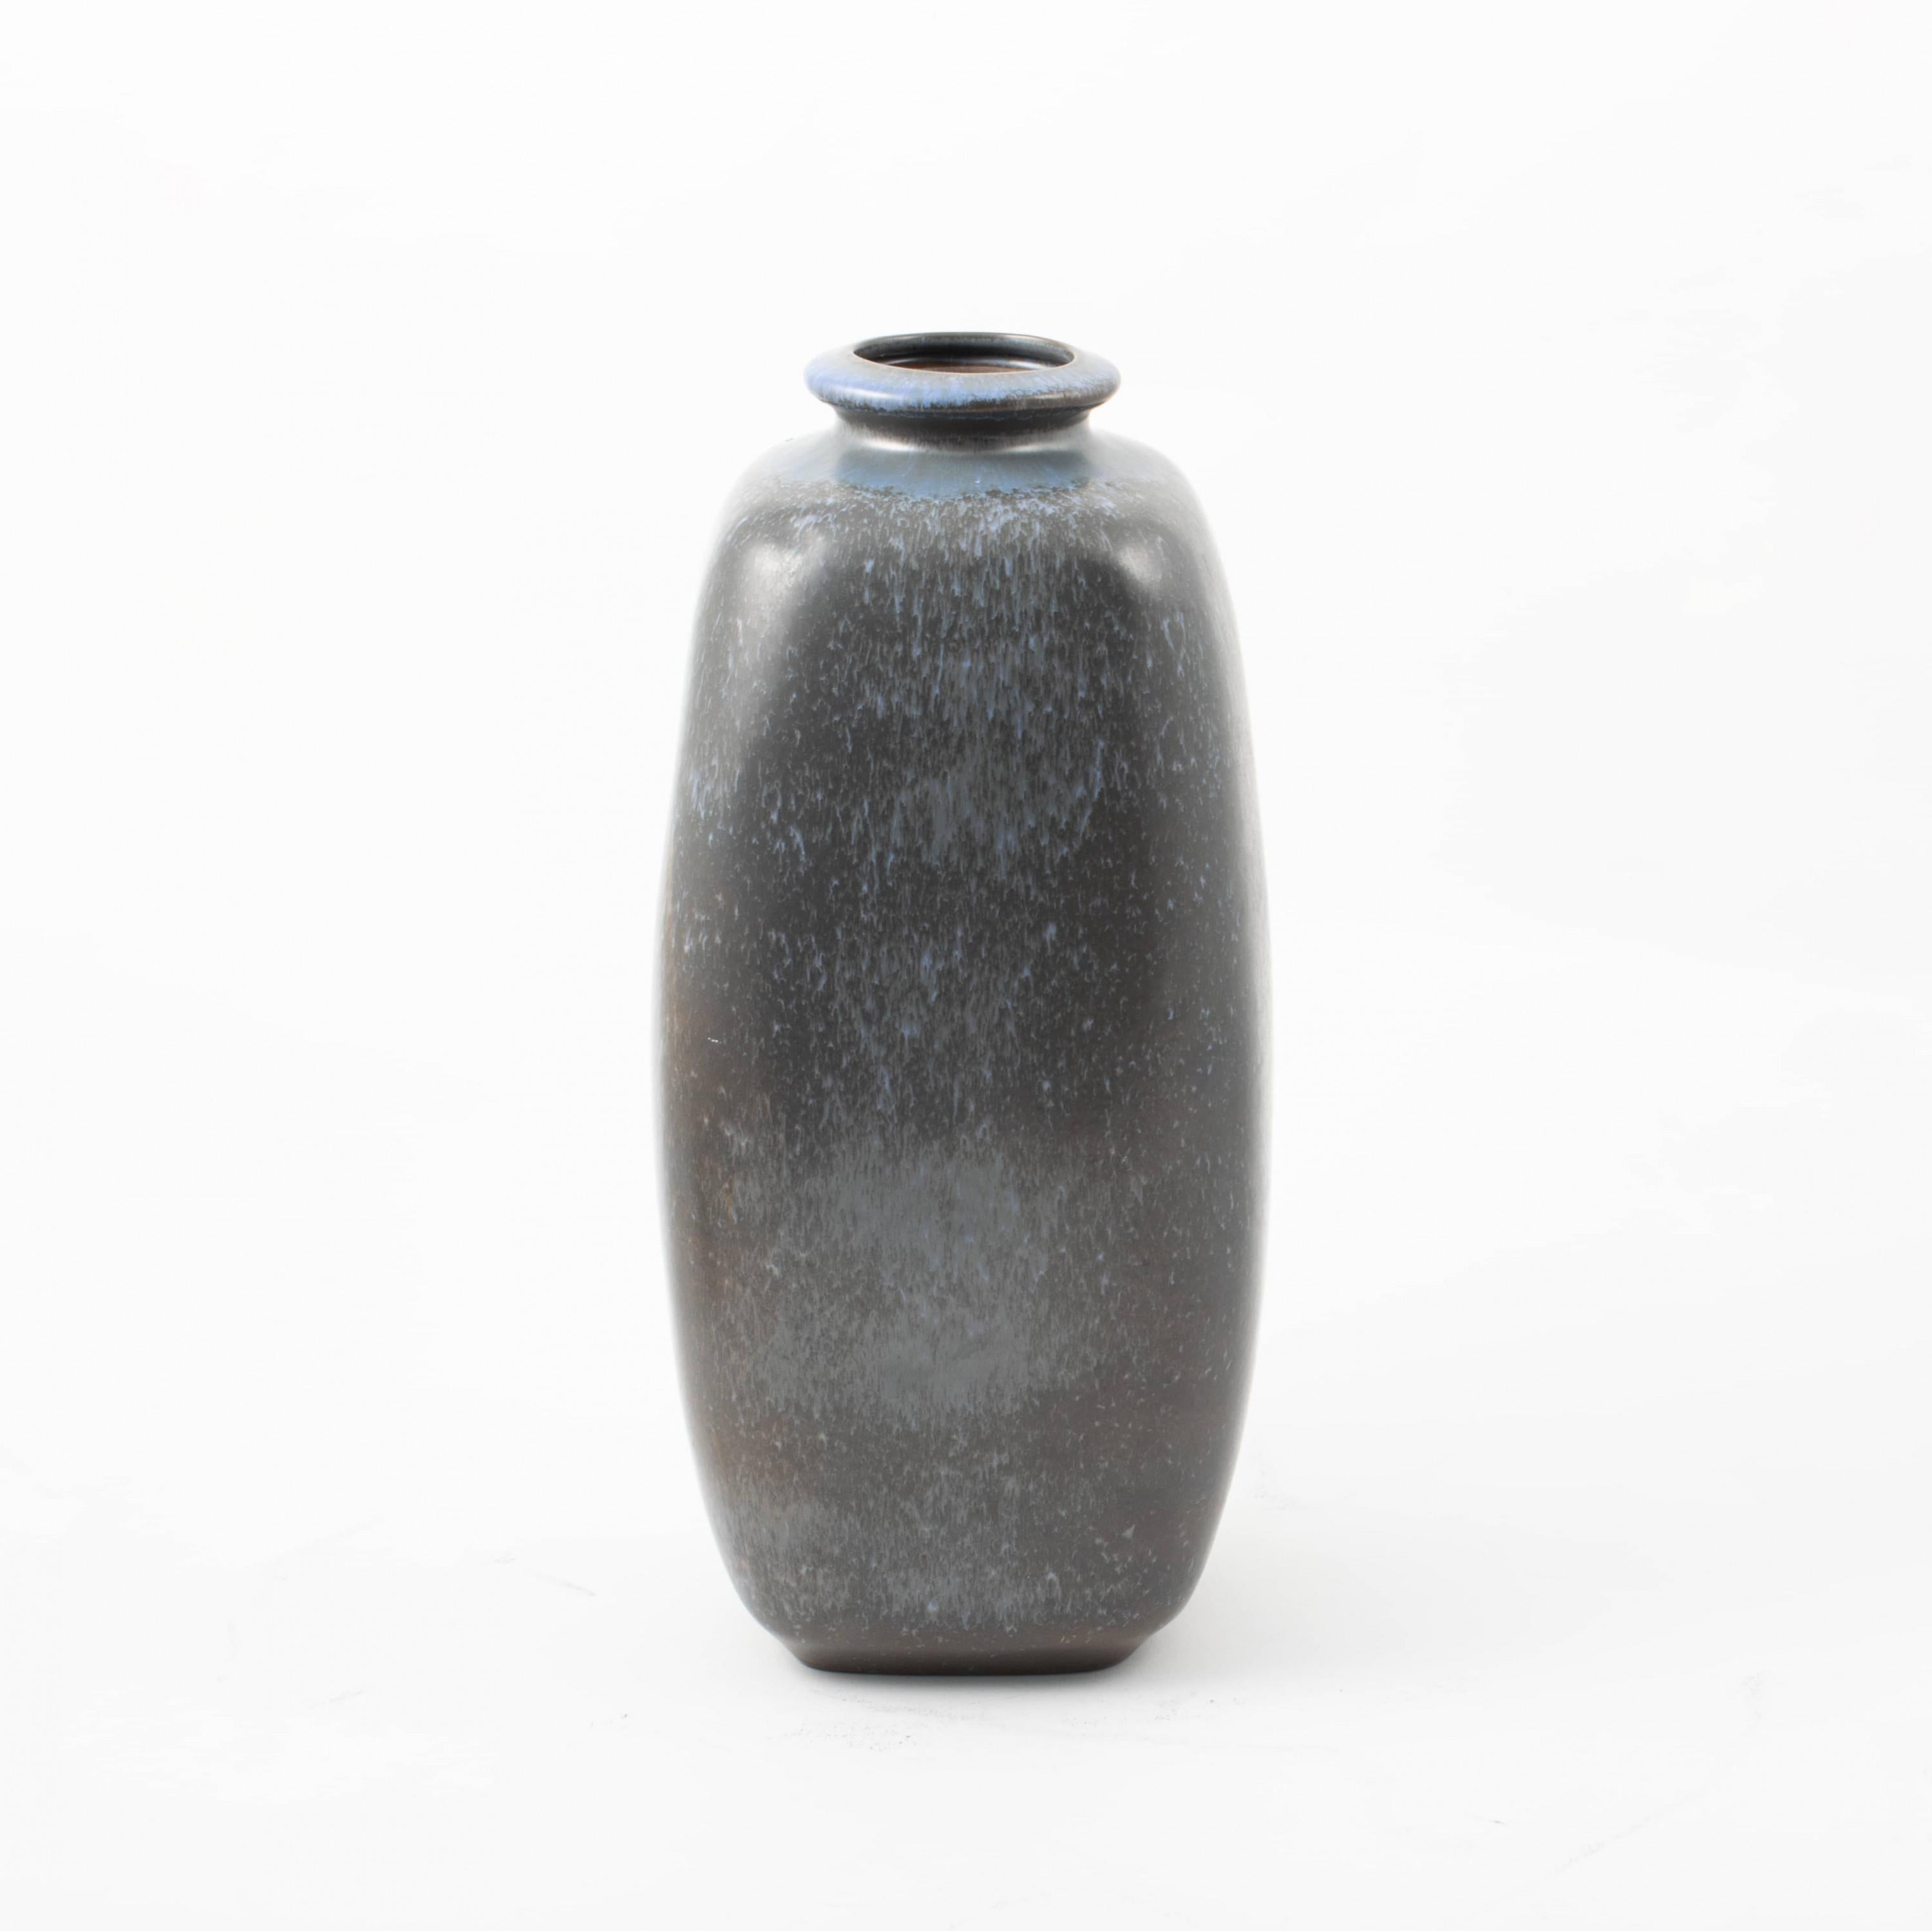 Large Knabstrup ceramic vase with glaze in shades of blue.
Denmark 1950-1960.
Stamped and with labels.